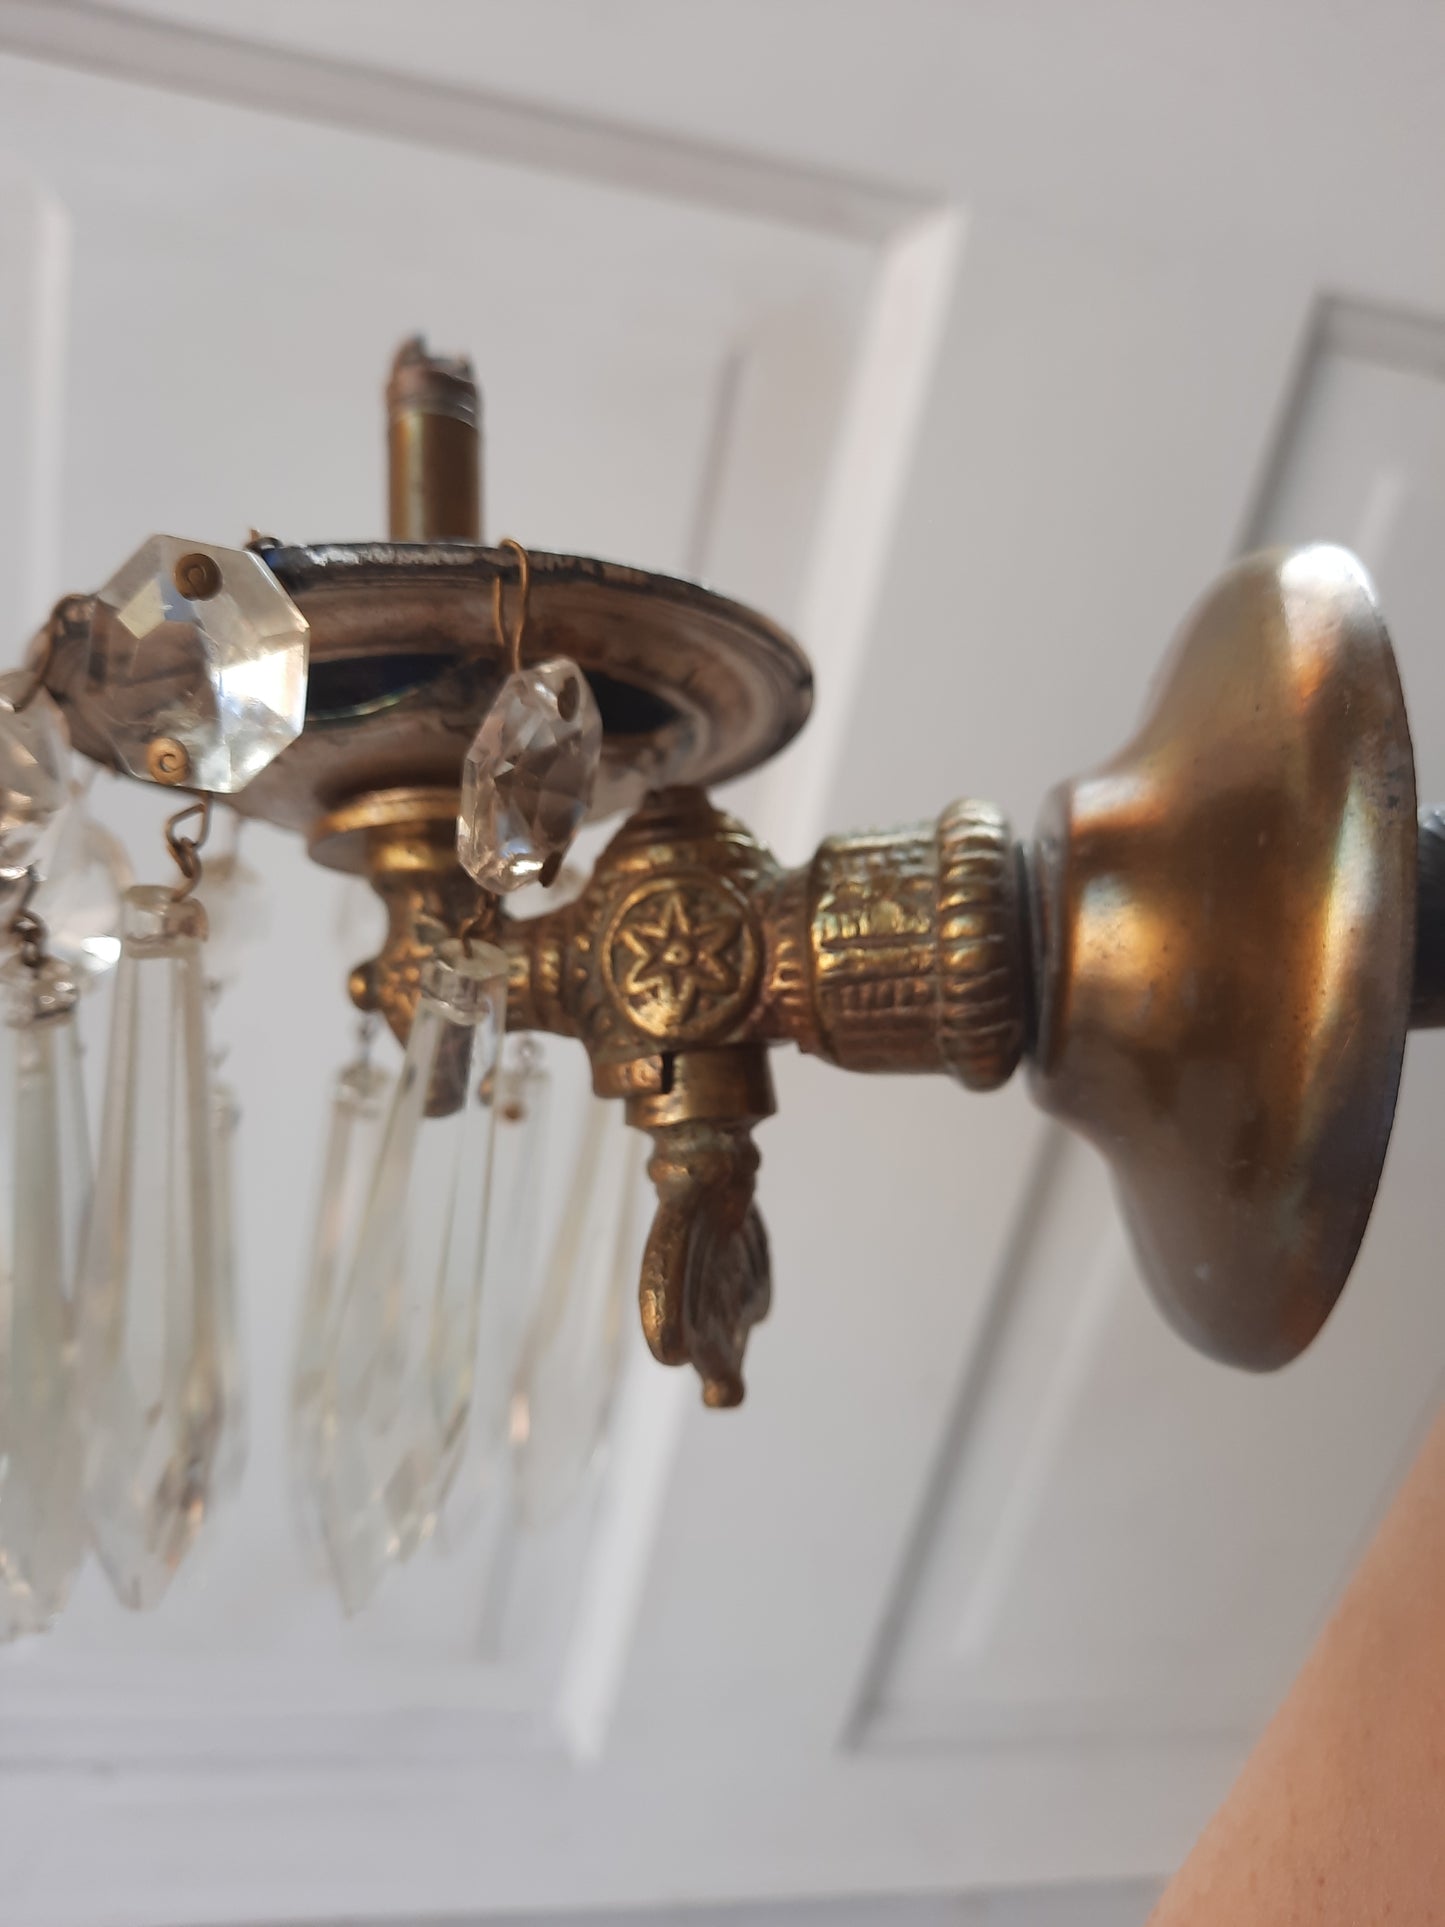 Antique Brass and Crystal Prism Gas Scone Fixture, Antique Gas Light Wall Sconce 082902